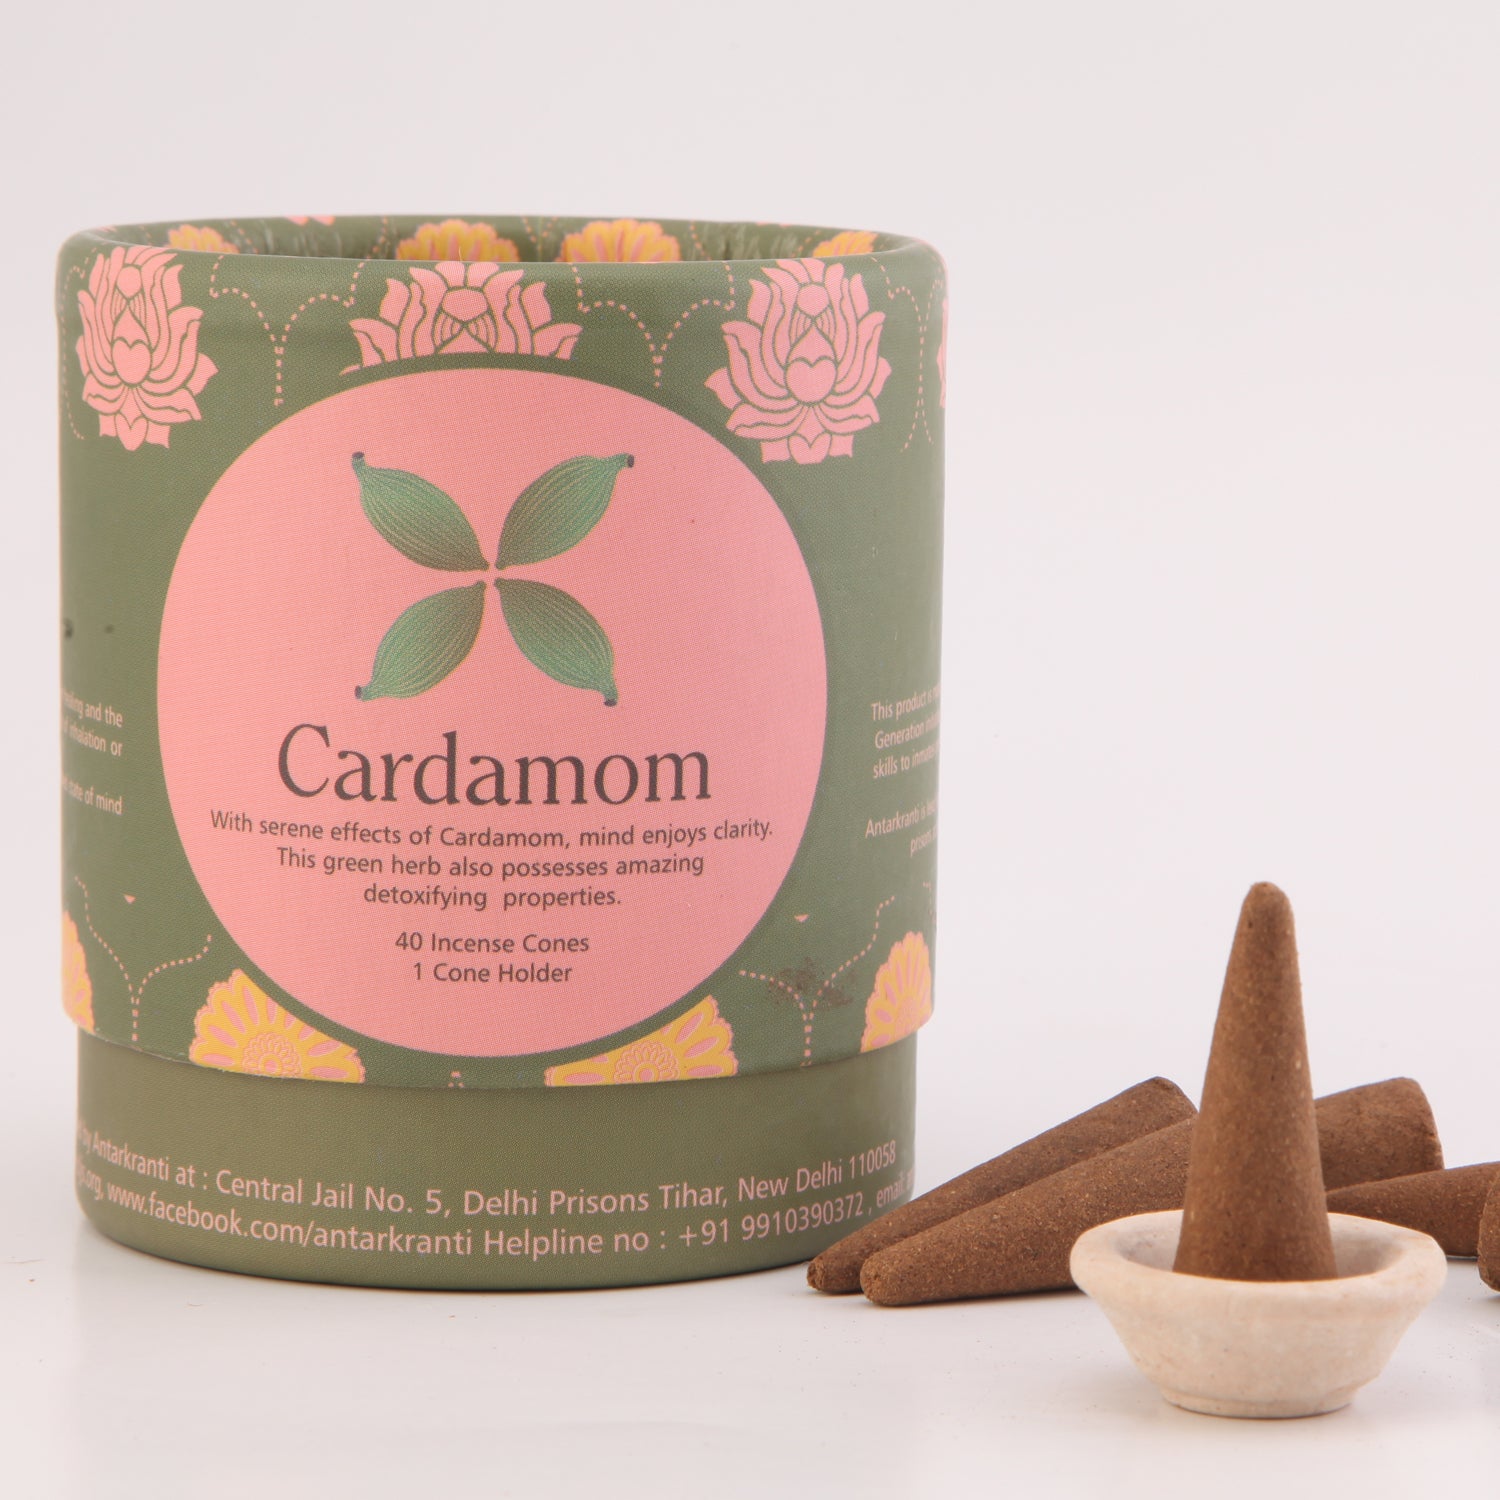 Cardamom Natural Incense Dhoop cones with a Cone holder | Charcoal free